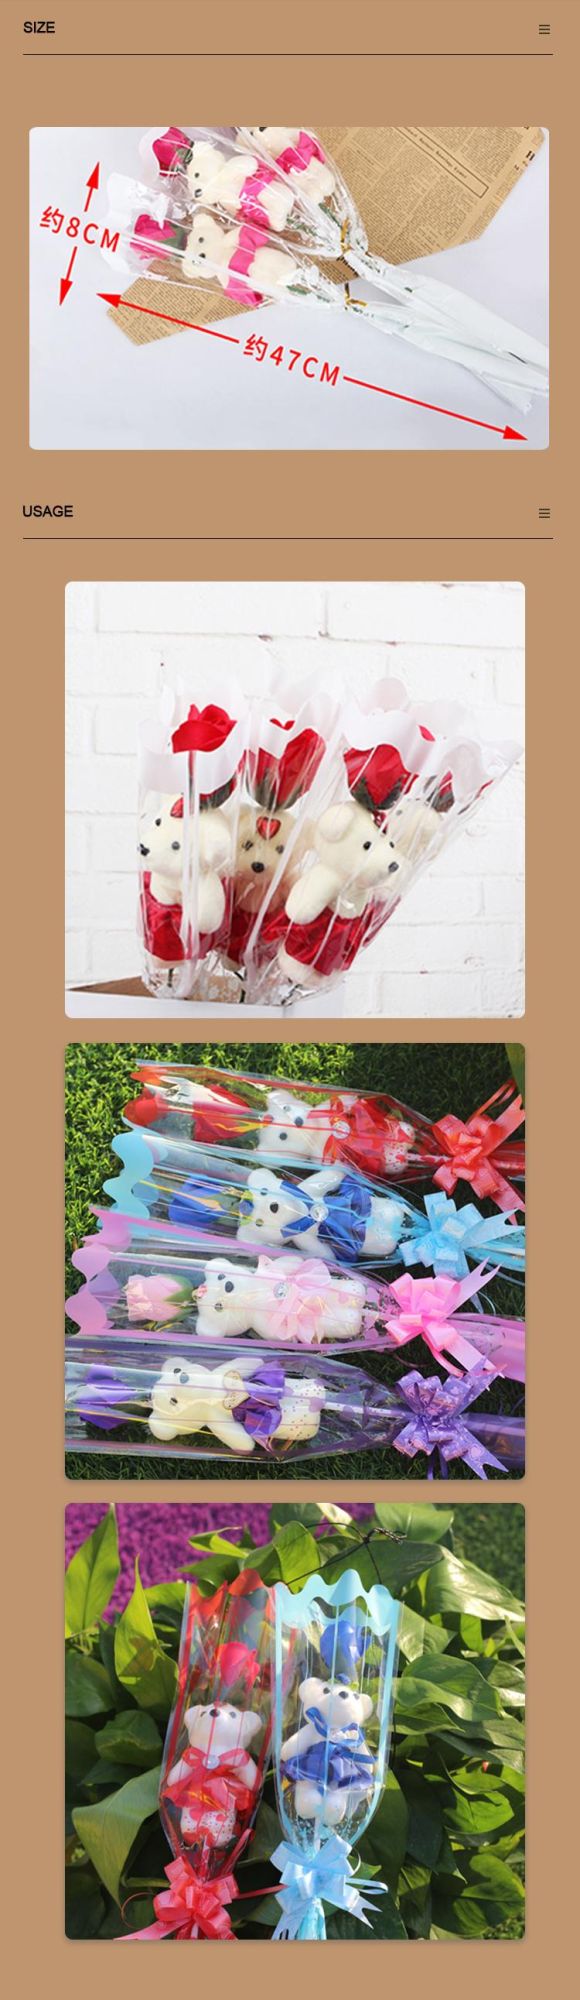 Soap Flower Bouquet Teddy Bear Gifts for Christmas, Valentine′s Day, Mother′s Day Gifts